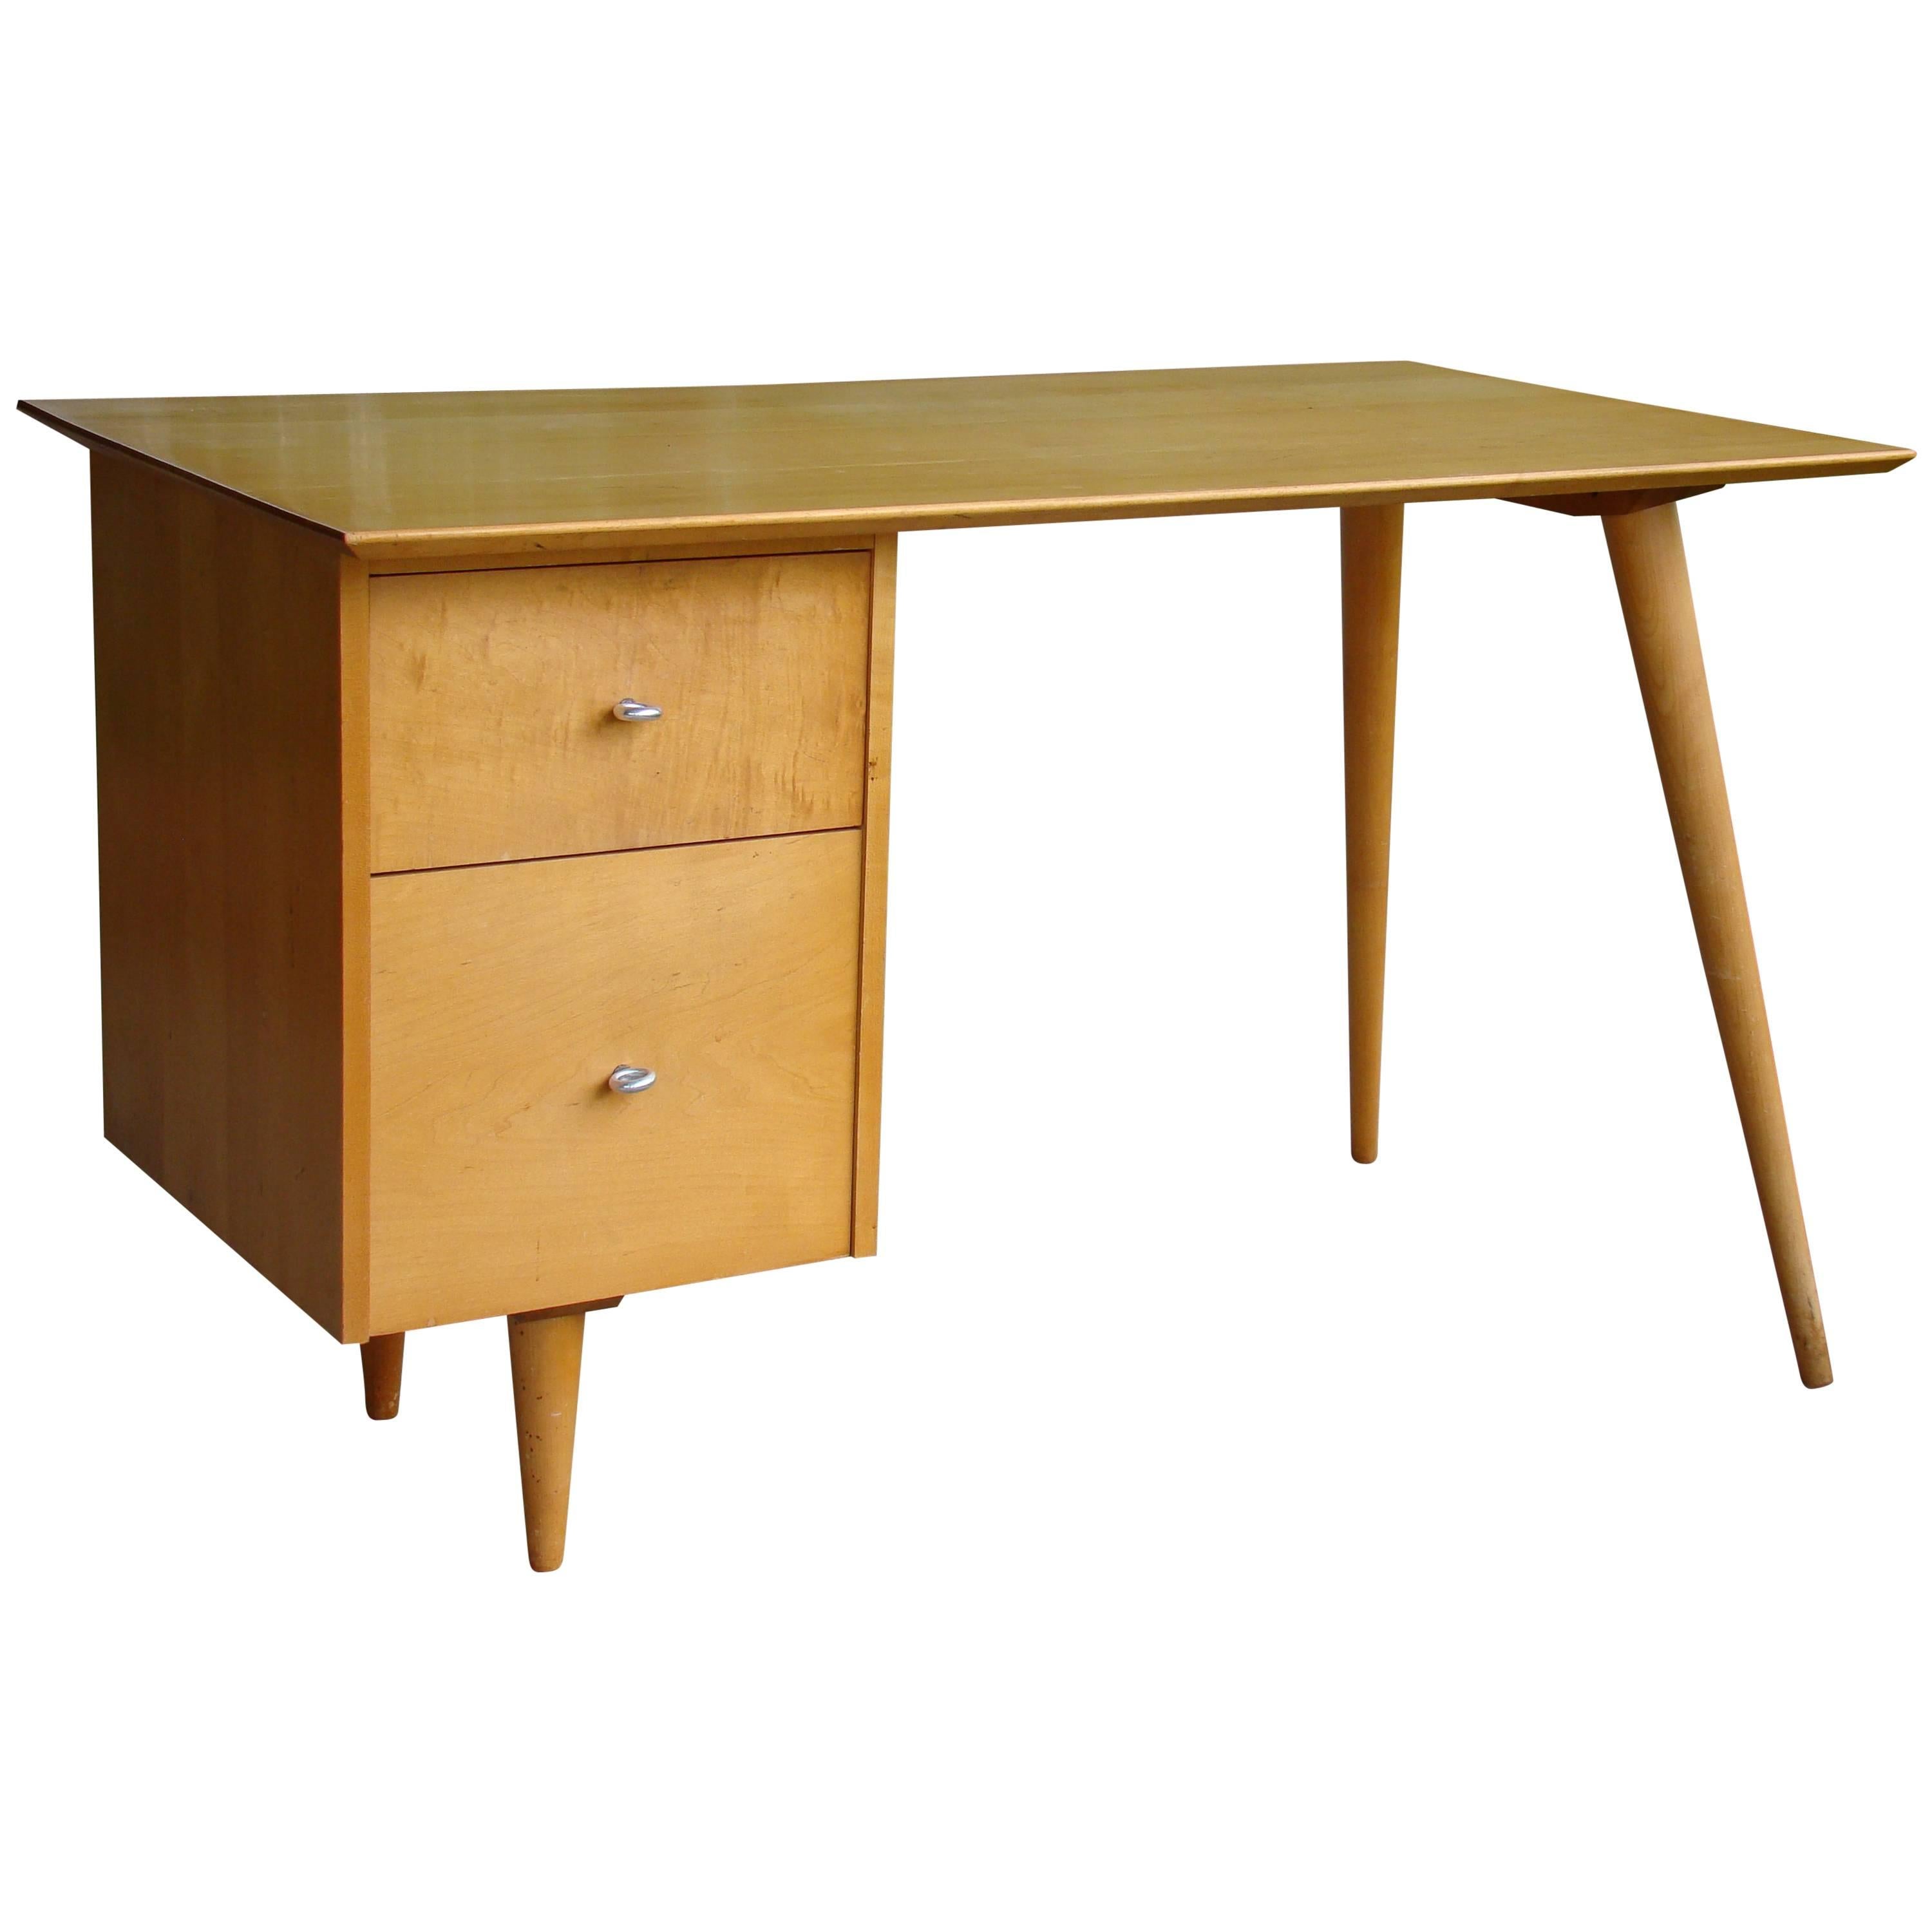 Paul McCobb for Winchendon Planner Group Desk in Maple with Chrome Pulls For Sale